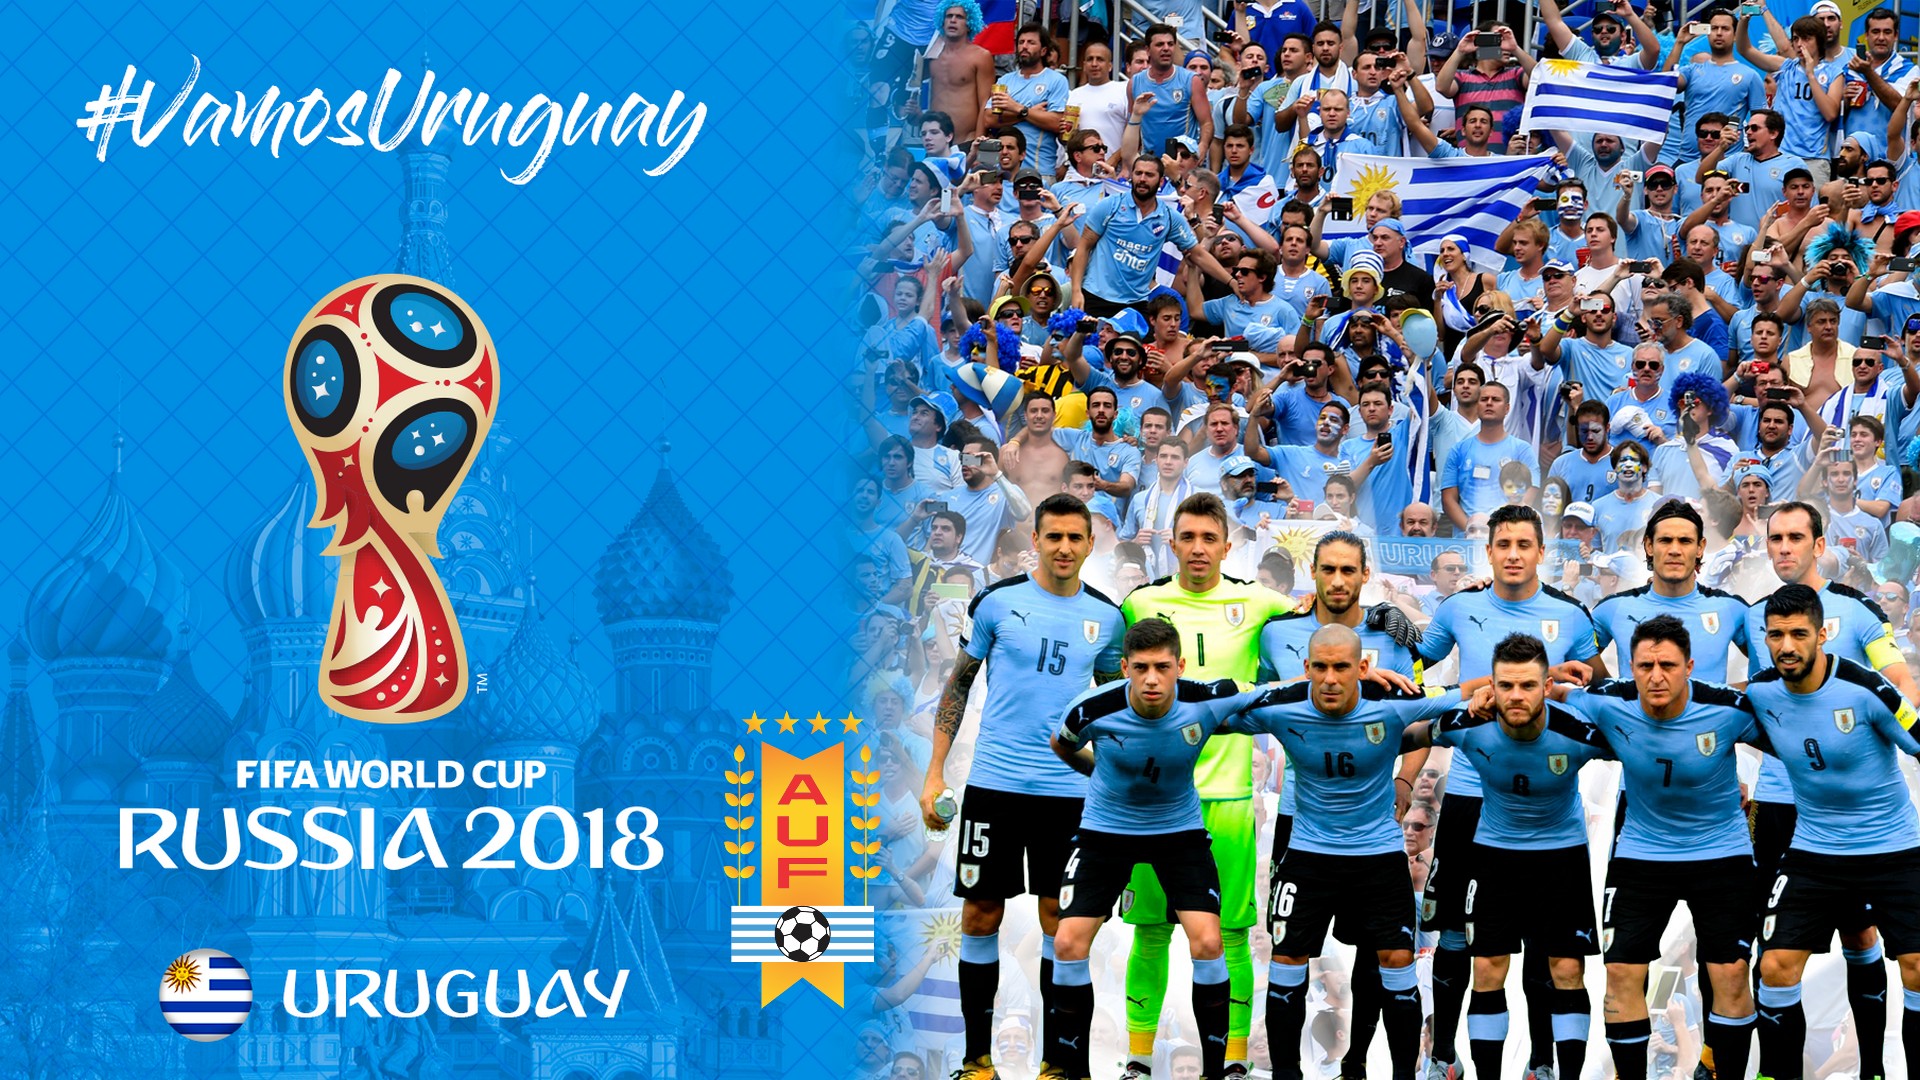 Wallpaper Desktop Uruguay National Team HD With Resolution 1920X1080 pixel. You can make this wallpaper for your Mac or Windows Desktop Background, iPhone, Android or Tablet and another Smartphone device for free